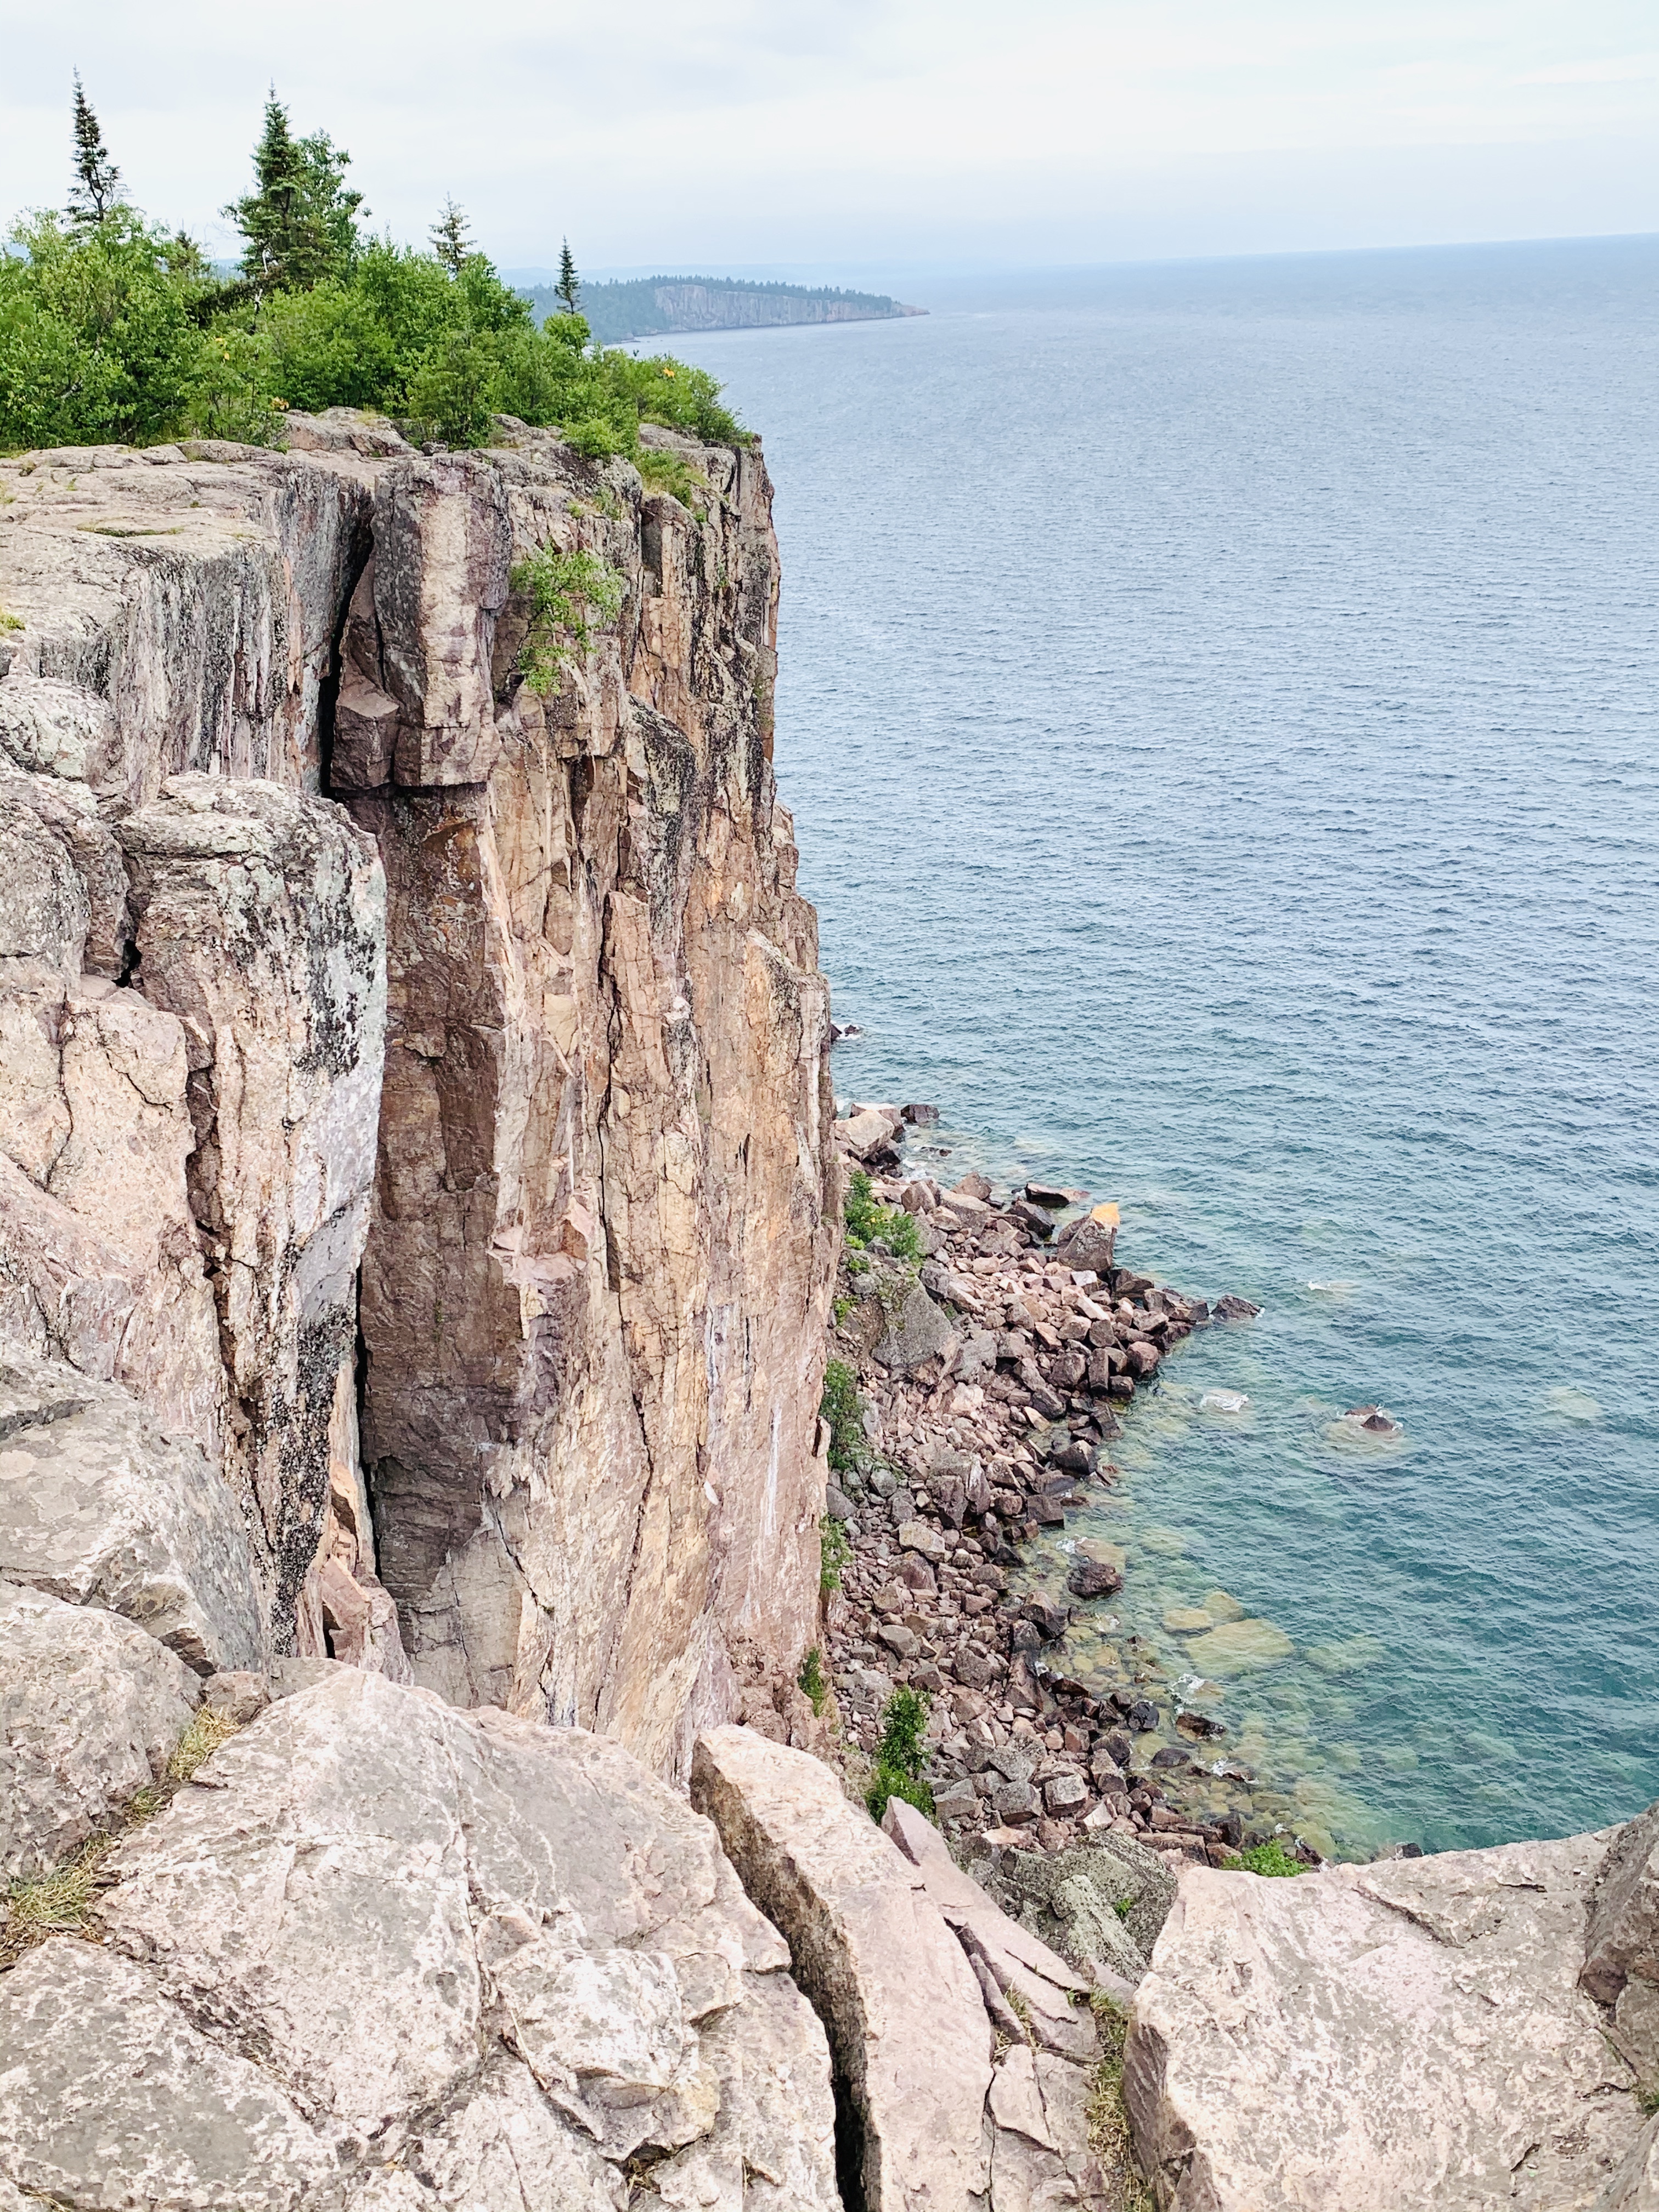 Top U.S. Family Travel Blog, Travel With A Plan, details a Minnesota North Shore road trip along the North Shore Scenic Drive.